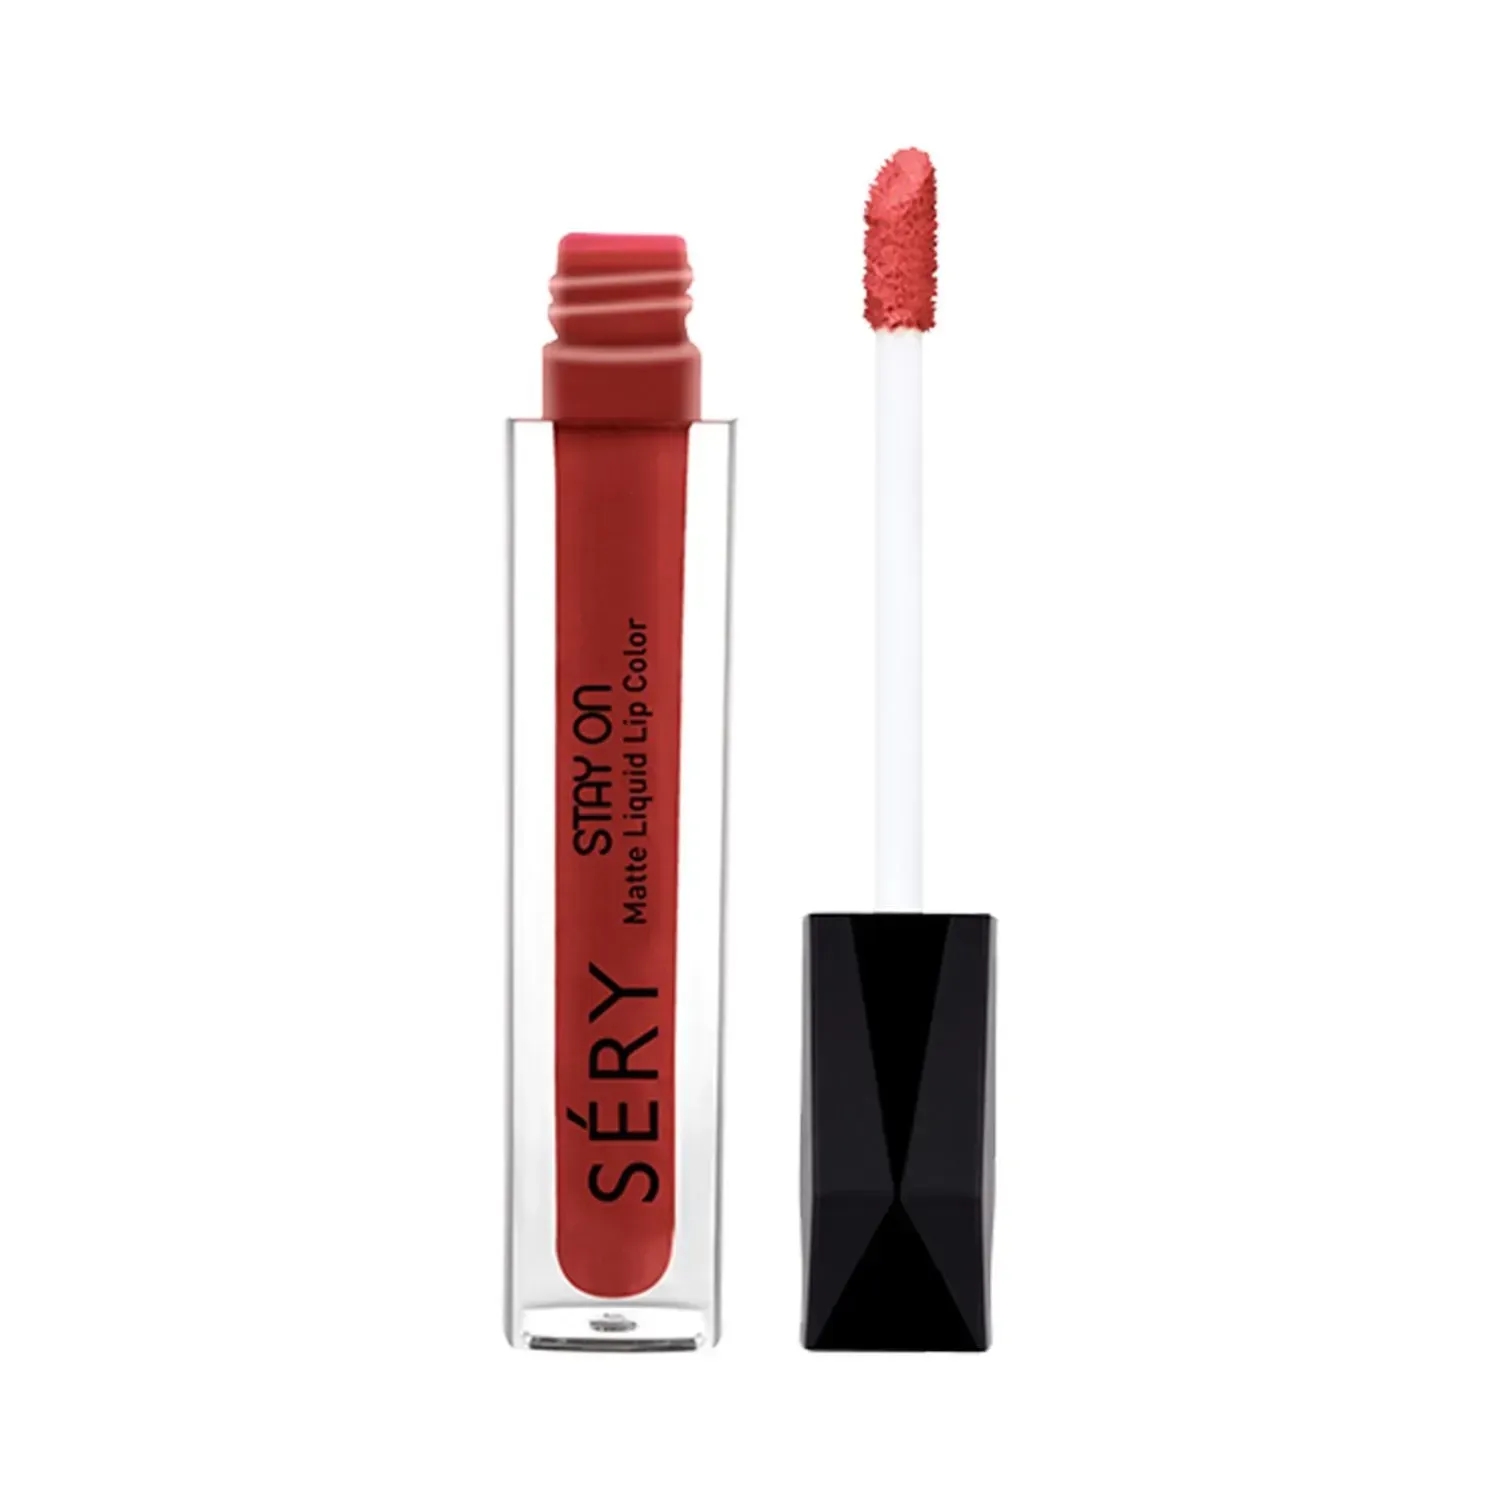 Sery Stay On Liquid Matte Lip Color - Autumn Wind LSO-07 (5ml)